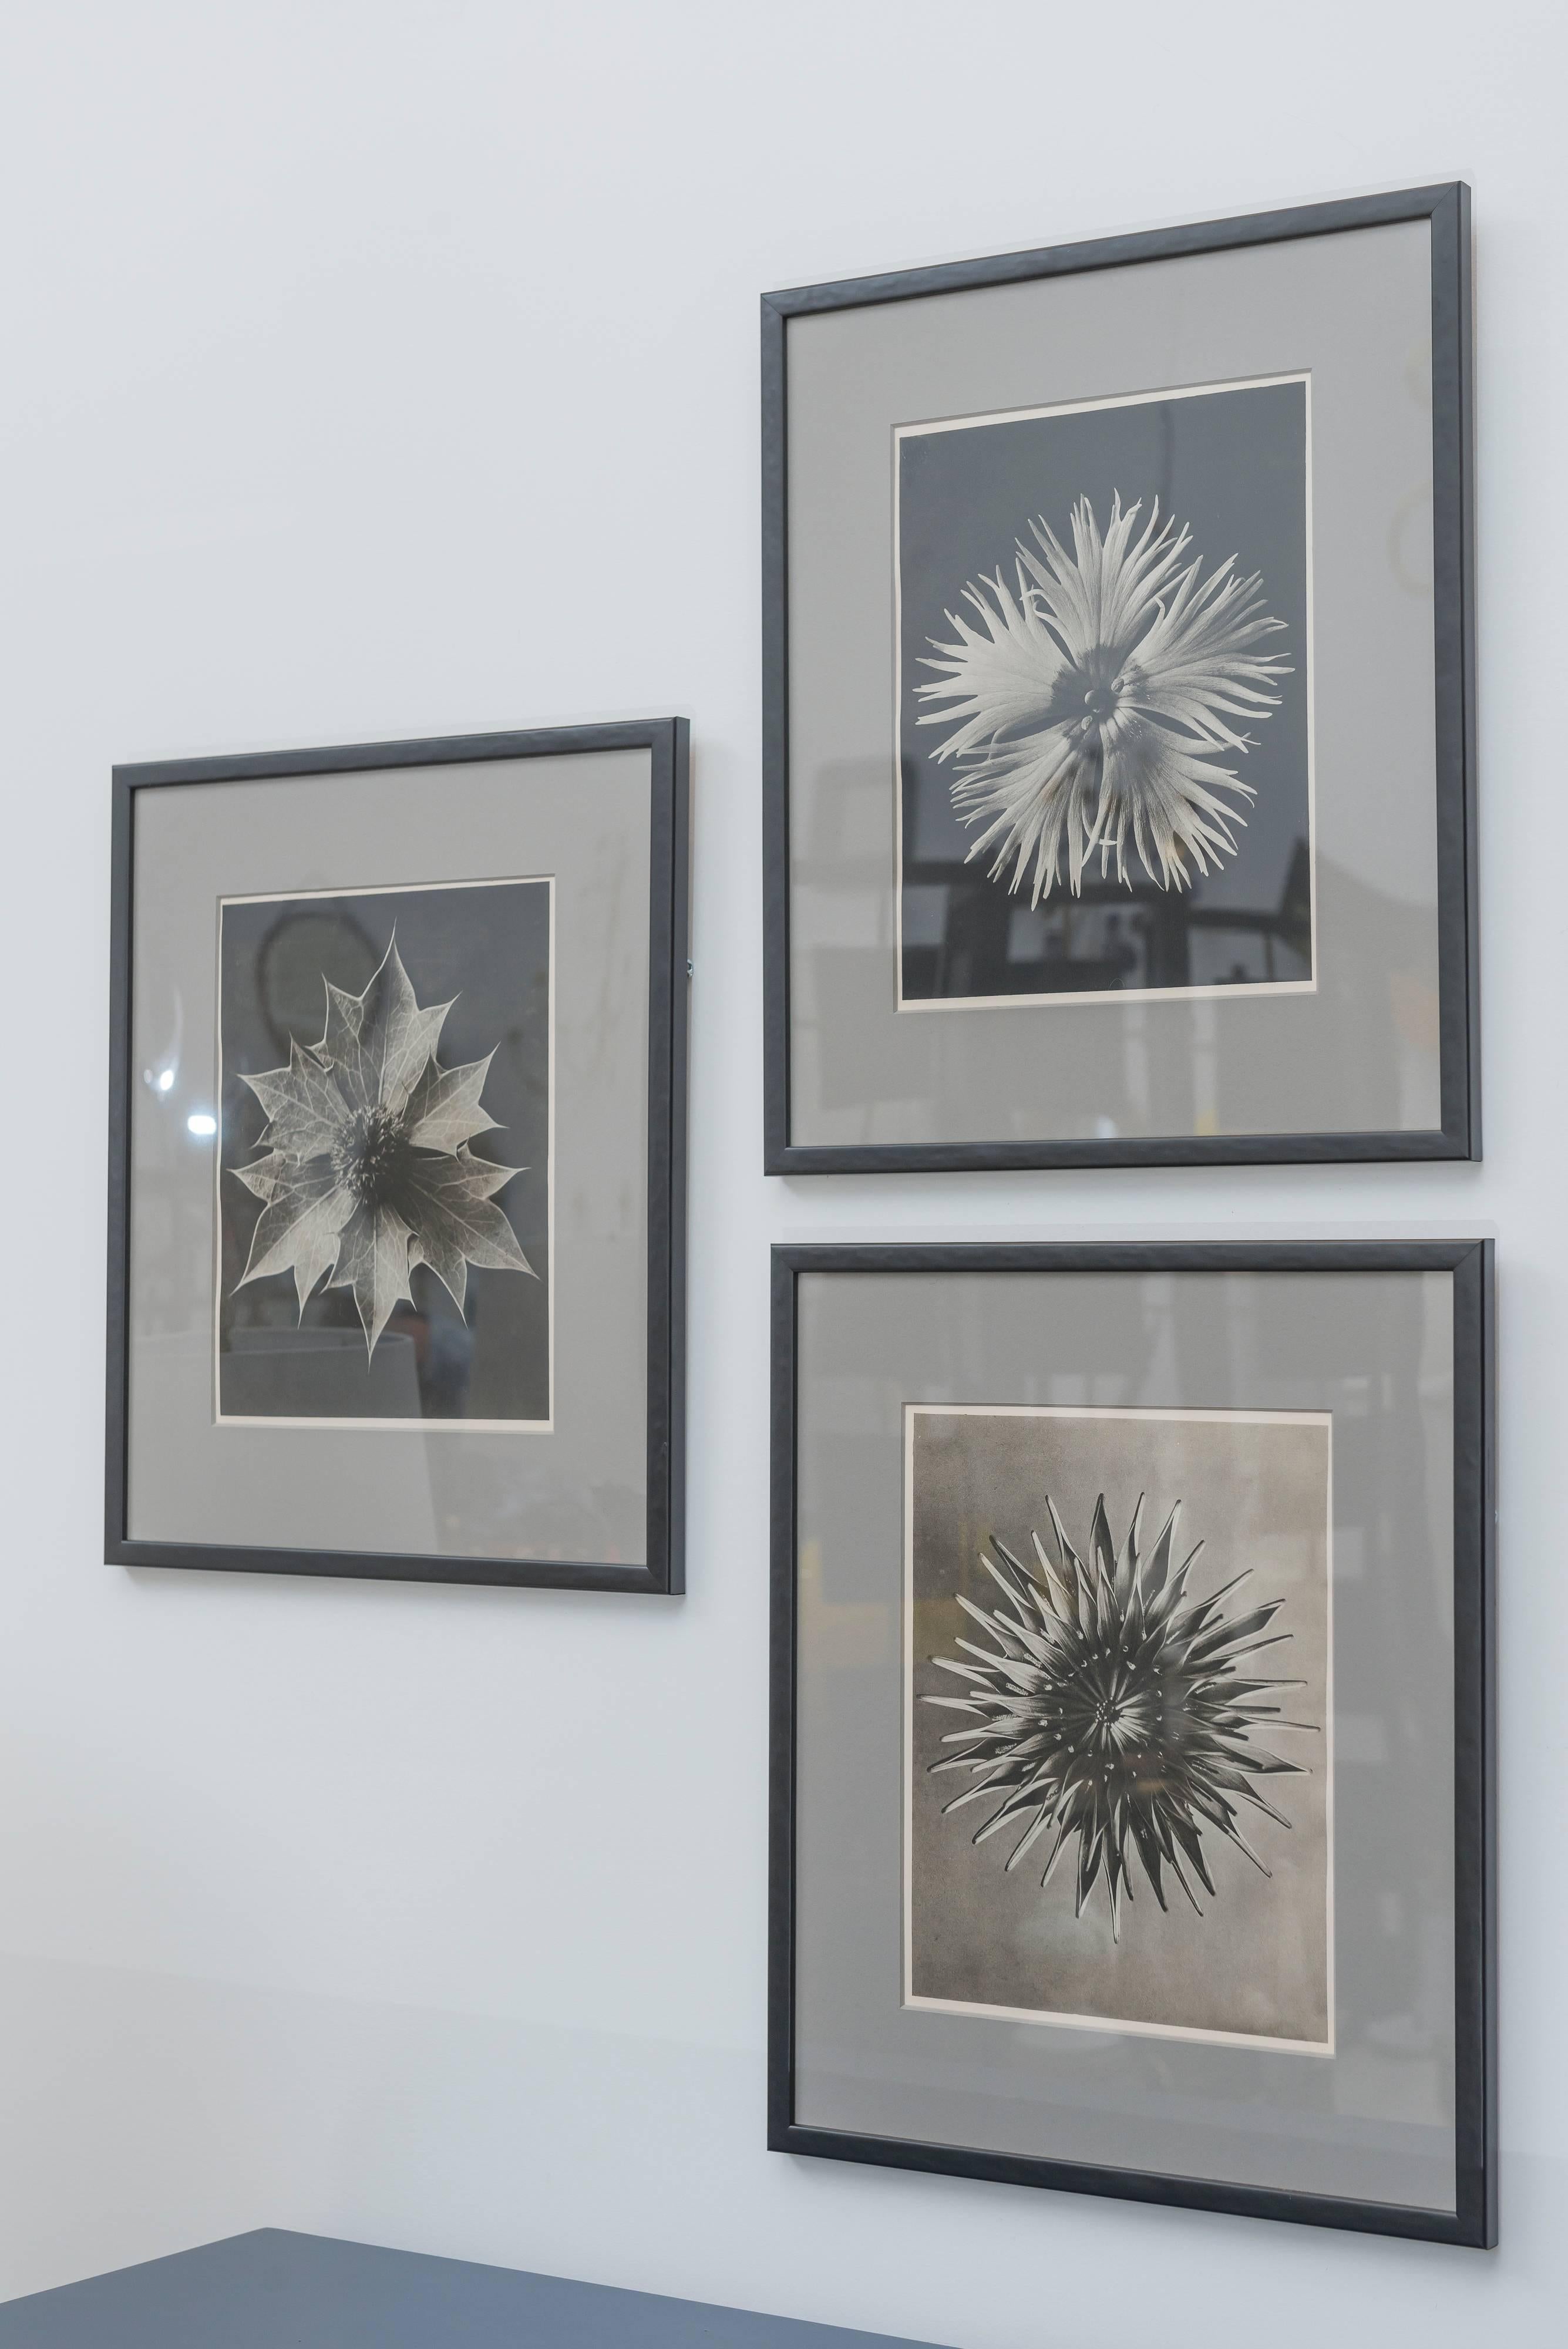 Group of four vintage framed Karl Blossfeldt prints from his book. He was a German photographer, sculptor, teacher, and artist who worked in Berlin, Germany. He is best known for his close-up photographs of plants and living things. He was inspired